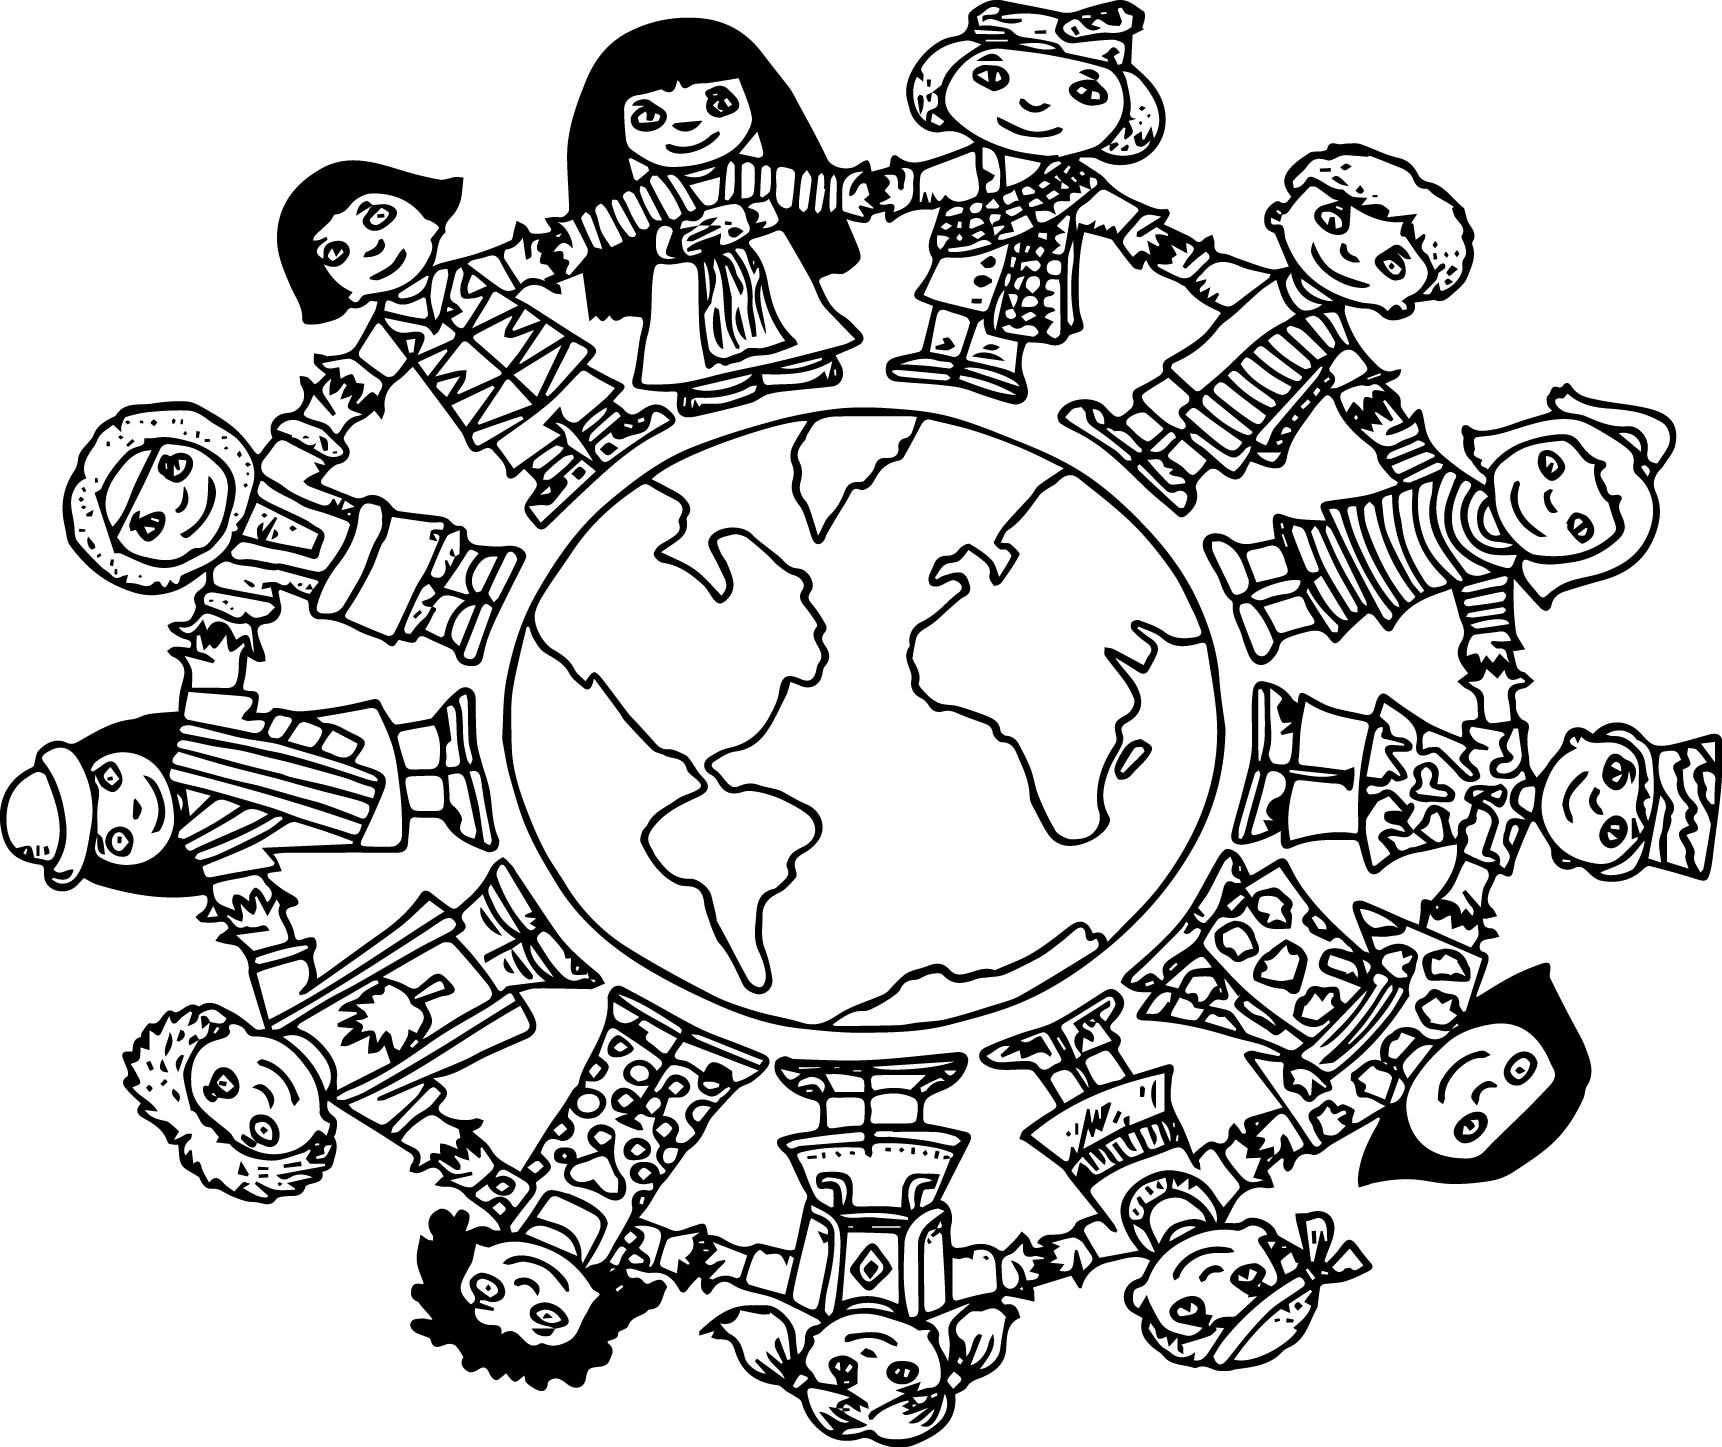 Children Of The World Coloring Pages
 Children World Coloring Page